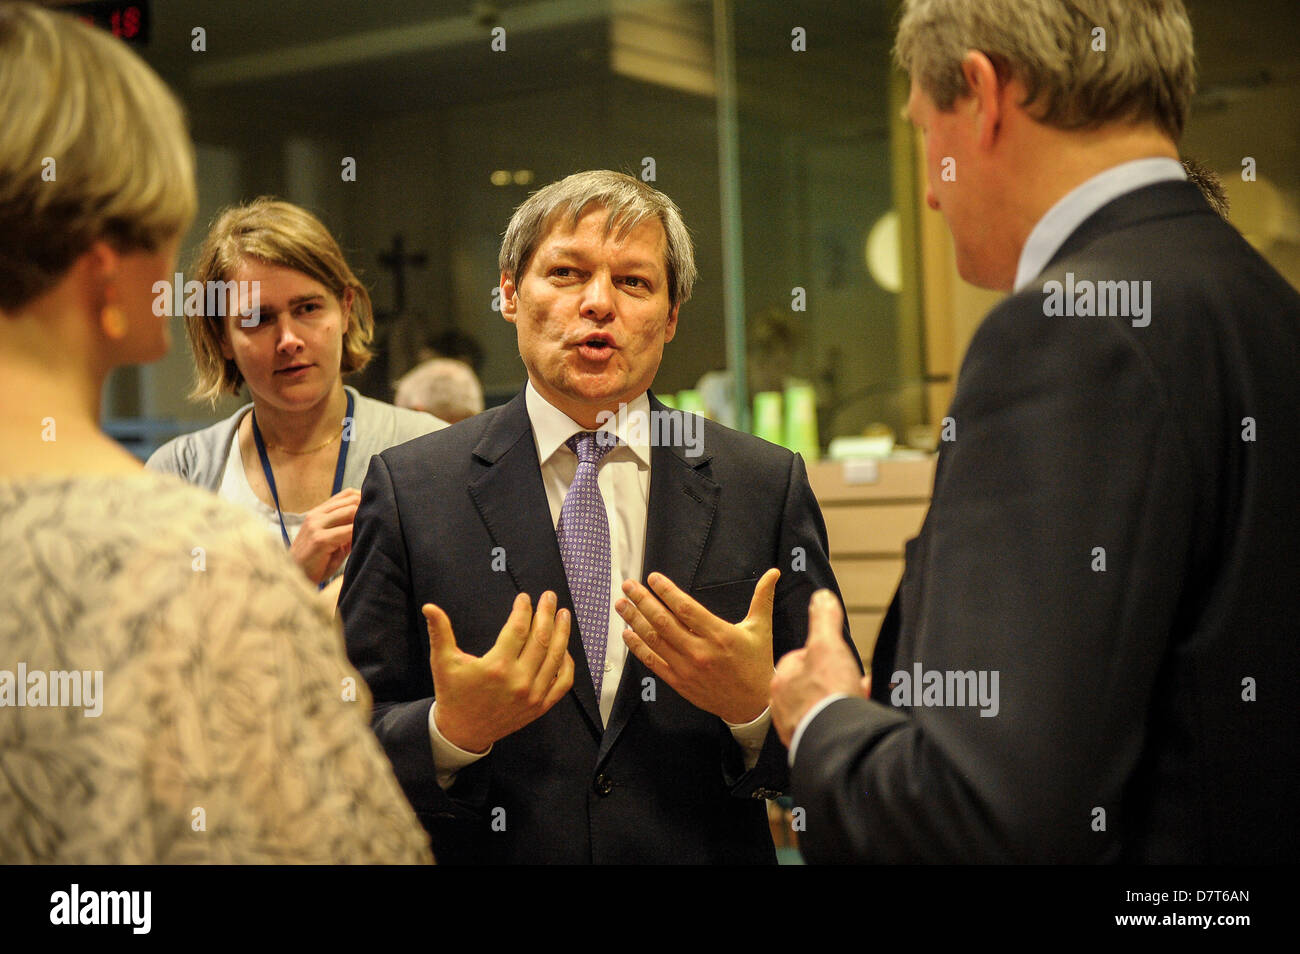 Dacian Ciolos, the European Commissioner for Agriculture and Rural Development   prior to  Agriculture and Fisheries council at the EU Headquarters  in Brussels, Belgium on 13.05.2013 Fisheries ministers meet  to revise their position on the reform of EU fishing rules. The reluctance of some countries, including France, Spain and Poland, to find common ground with the Parliament on key issues of the reform is threatening to cause the collapse of negotiations on a new Common Fisheries Policy (CFP).  by Wiktor Dabkowski Stock Photo